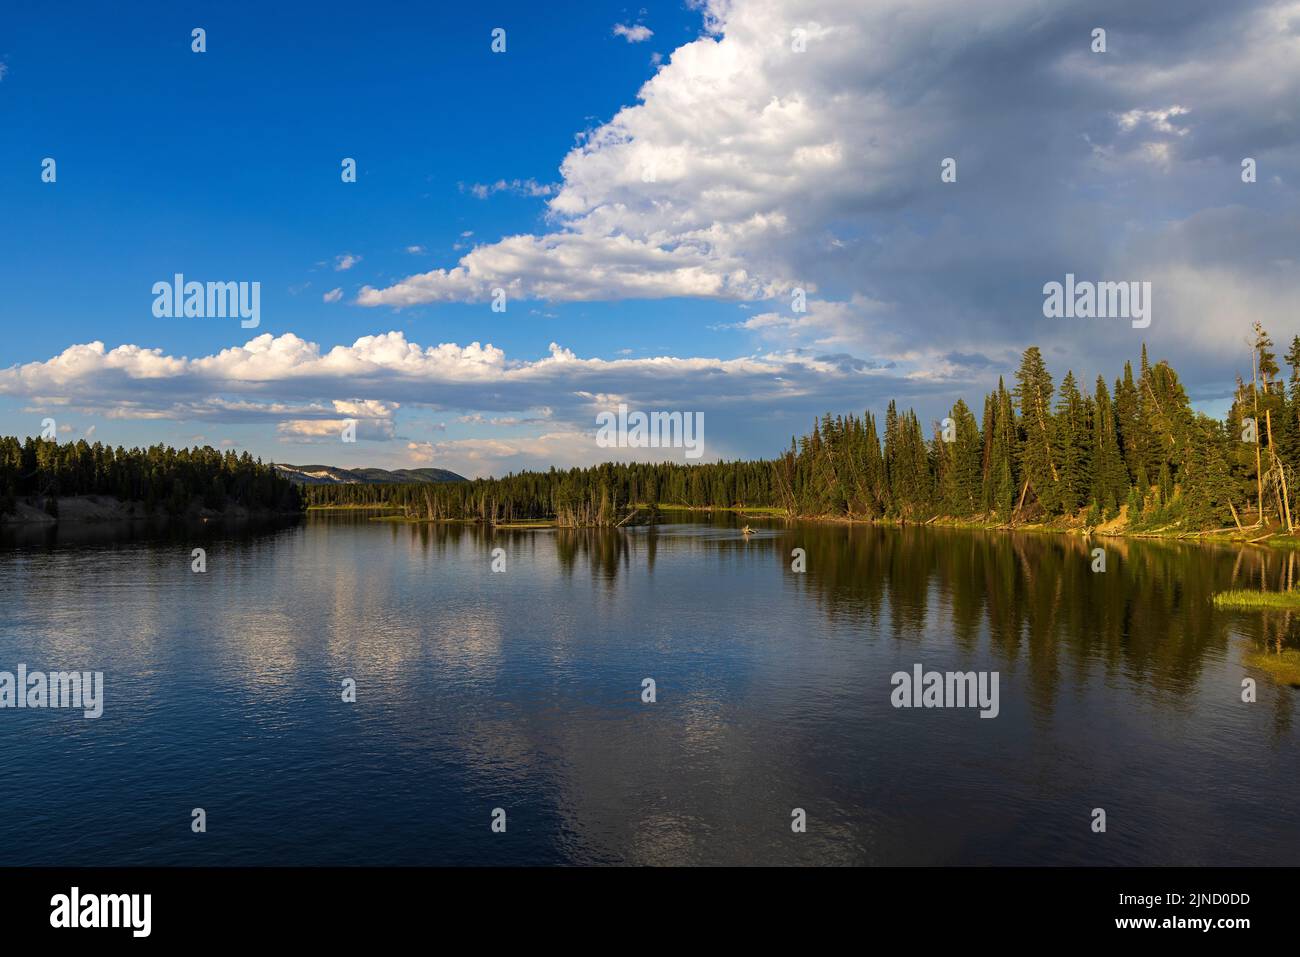 This is a view of the Yellowstone River looking northeast from Fishing Bridge in Yellowstone National Park, Teton County, Wyoming. Stock Photo